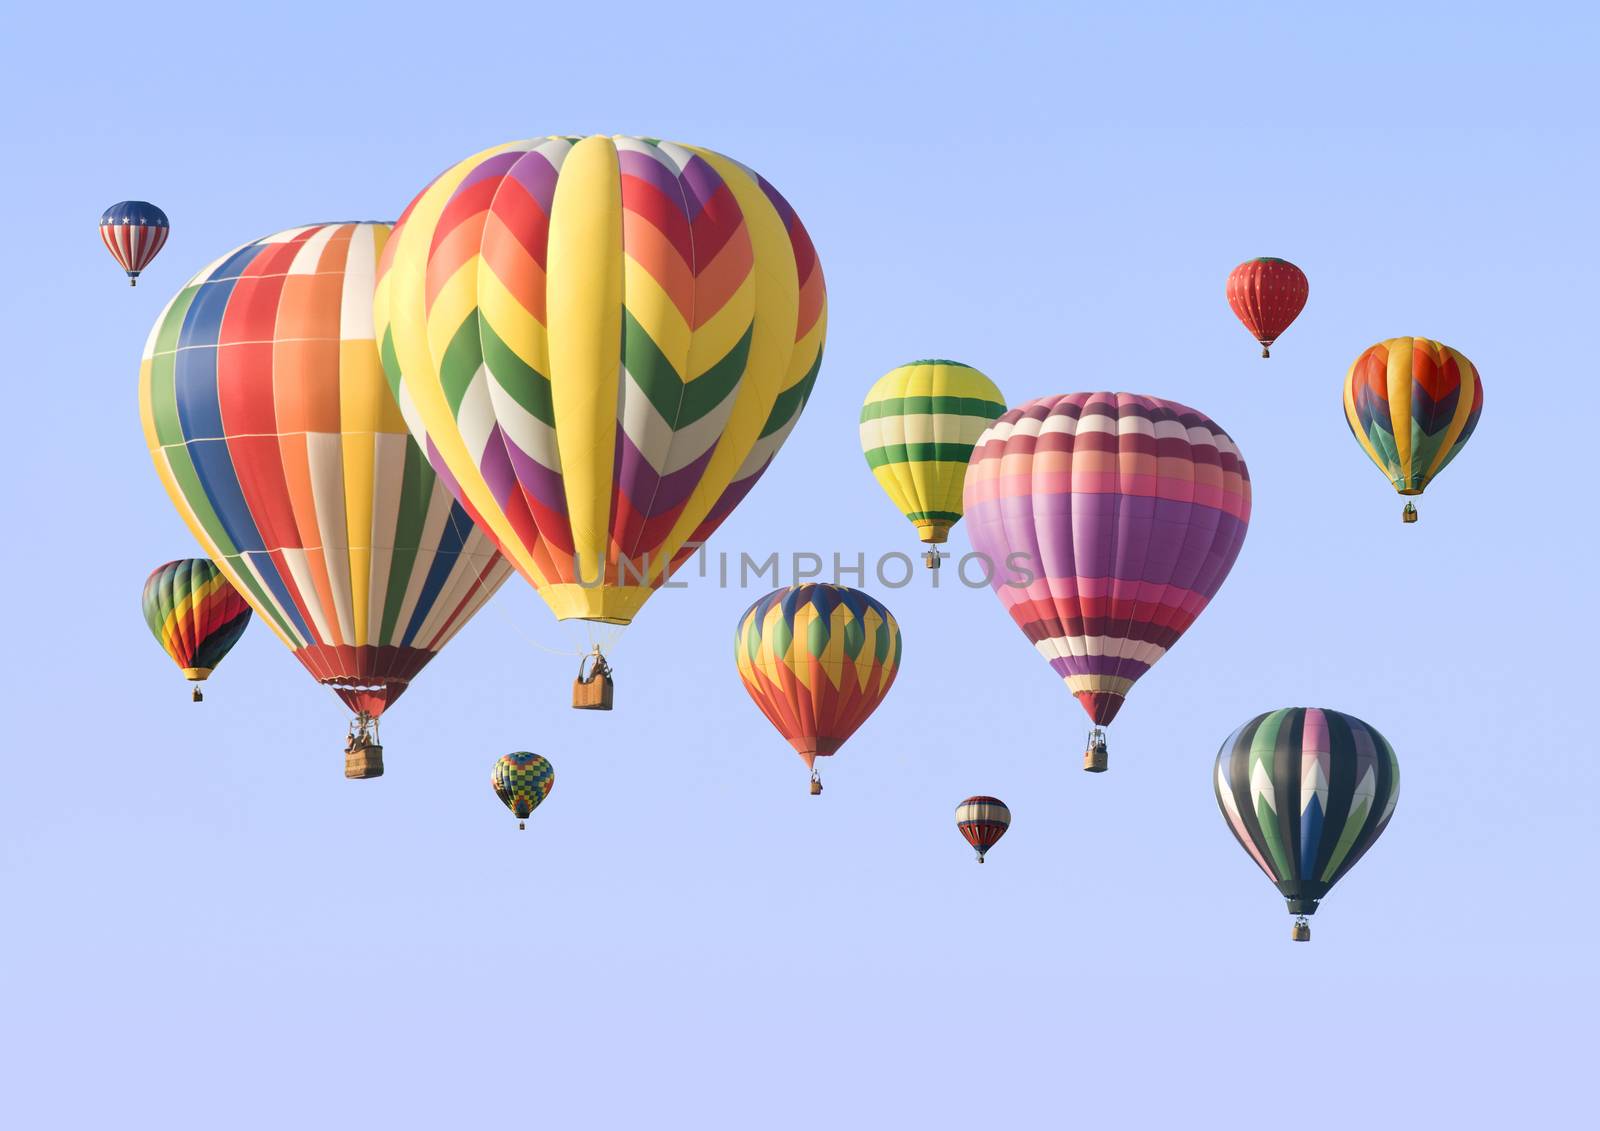 A group of colorful hot-air balloons floating across the sky